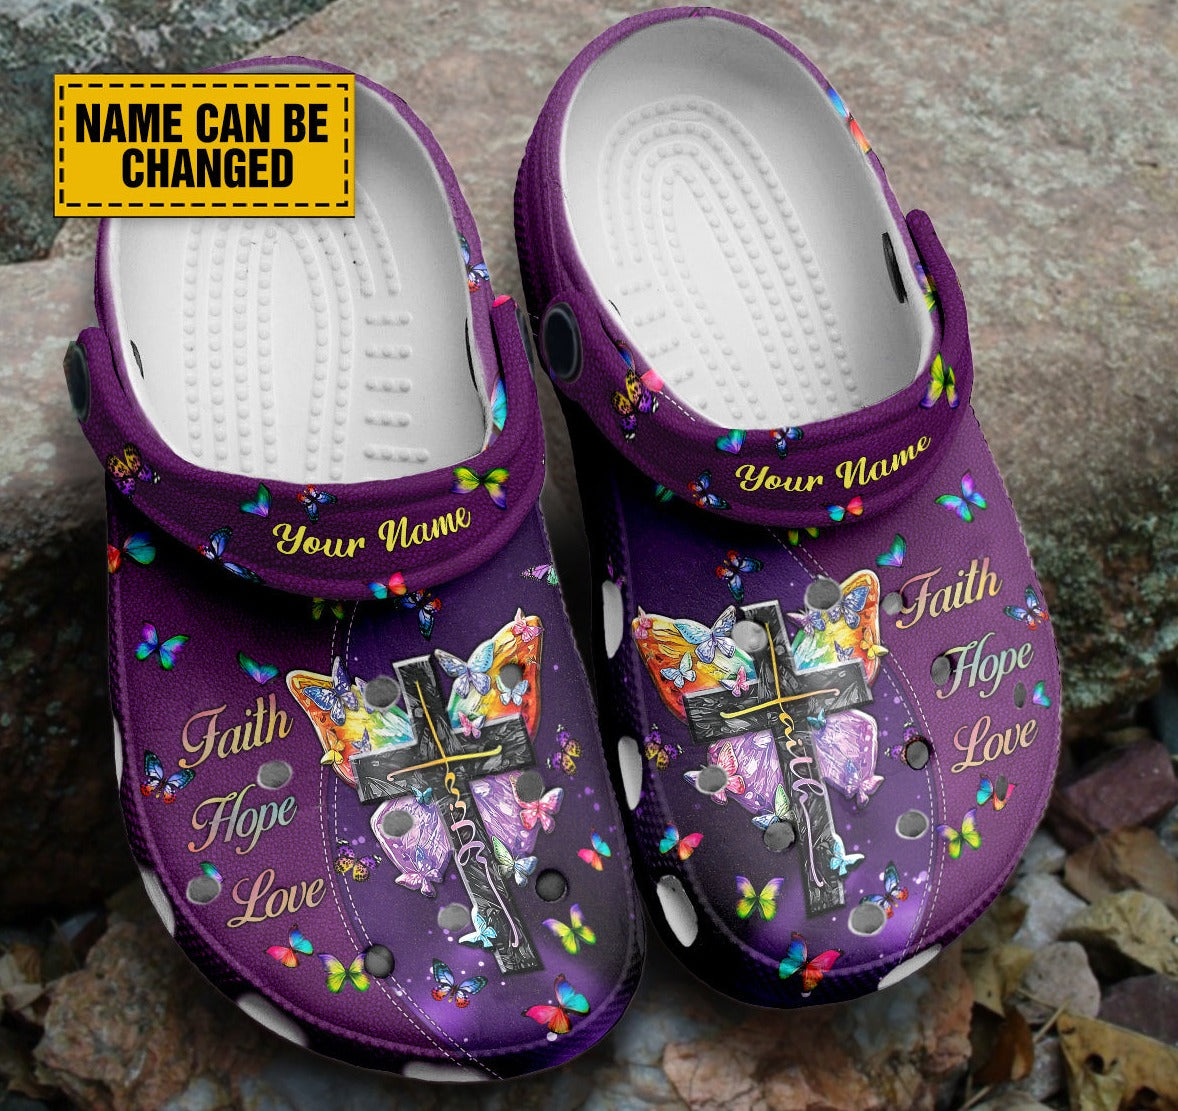 Teesdily | Jesus Cross Butterfly Customized Backstrap Clogs, Faith Hope Love Clog Shoes, Christian Clogs Gift, Religious Kid & Adult Eva Clogs